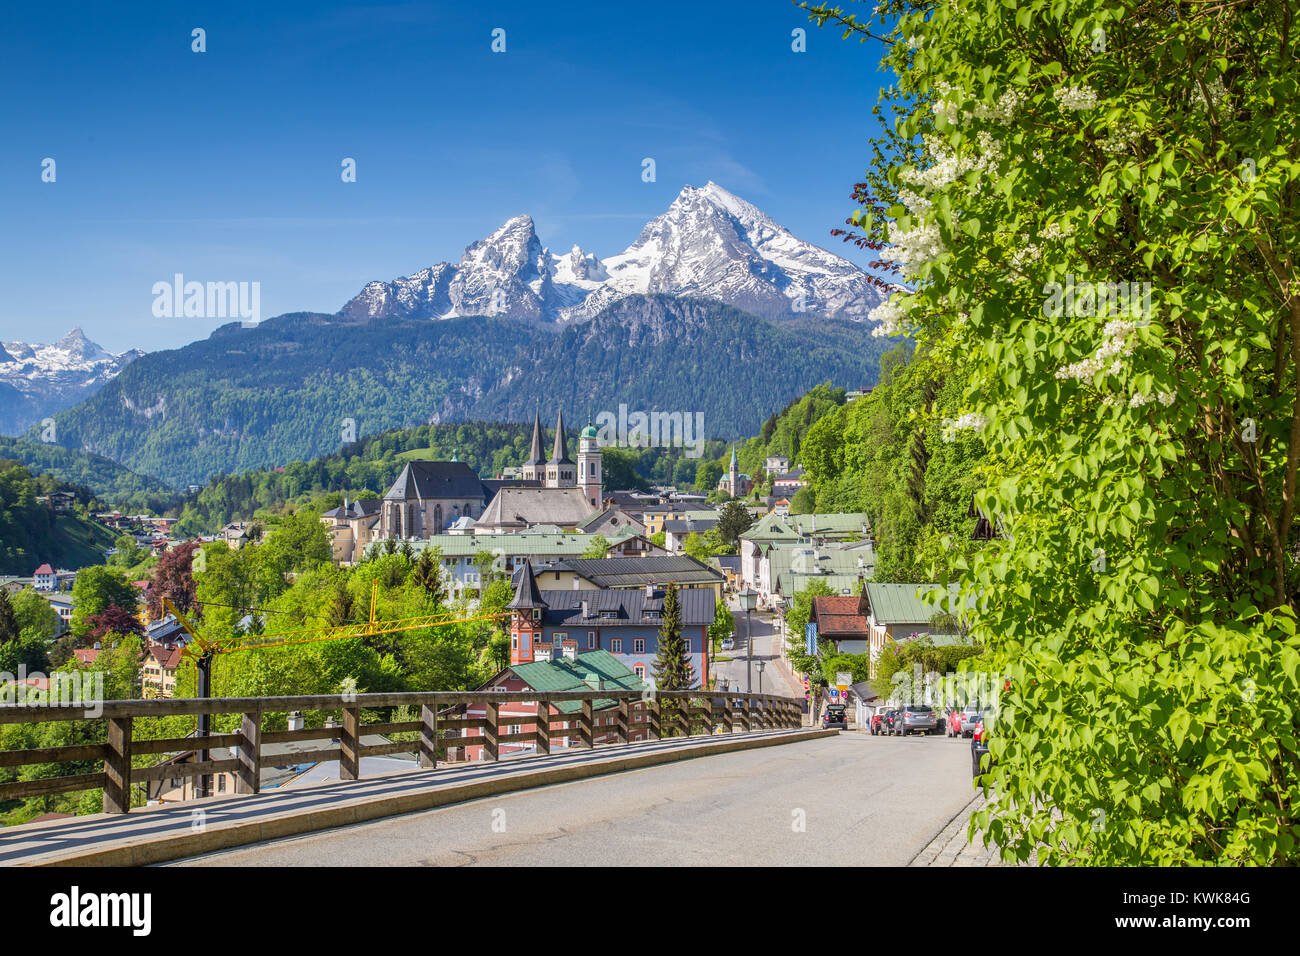 Historic town of Berchtesgaden with famous Watzmann mountain in the background on a sunny day in springtime, Nationalpark Berchtesgadener Land, Upper  Stock Photo